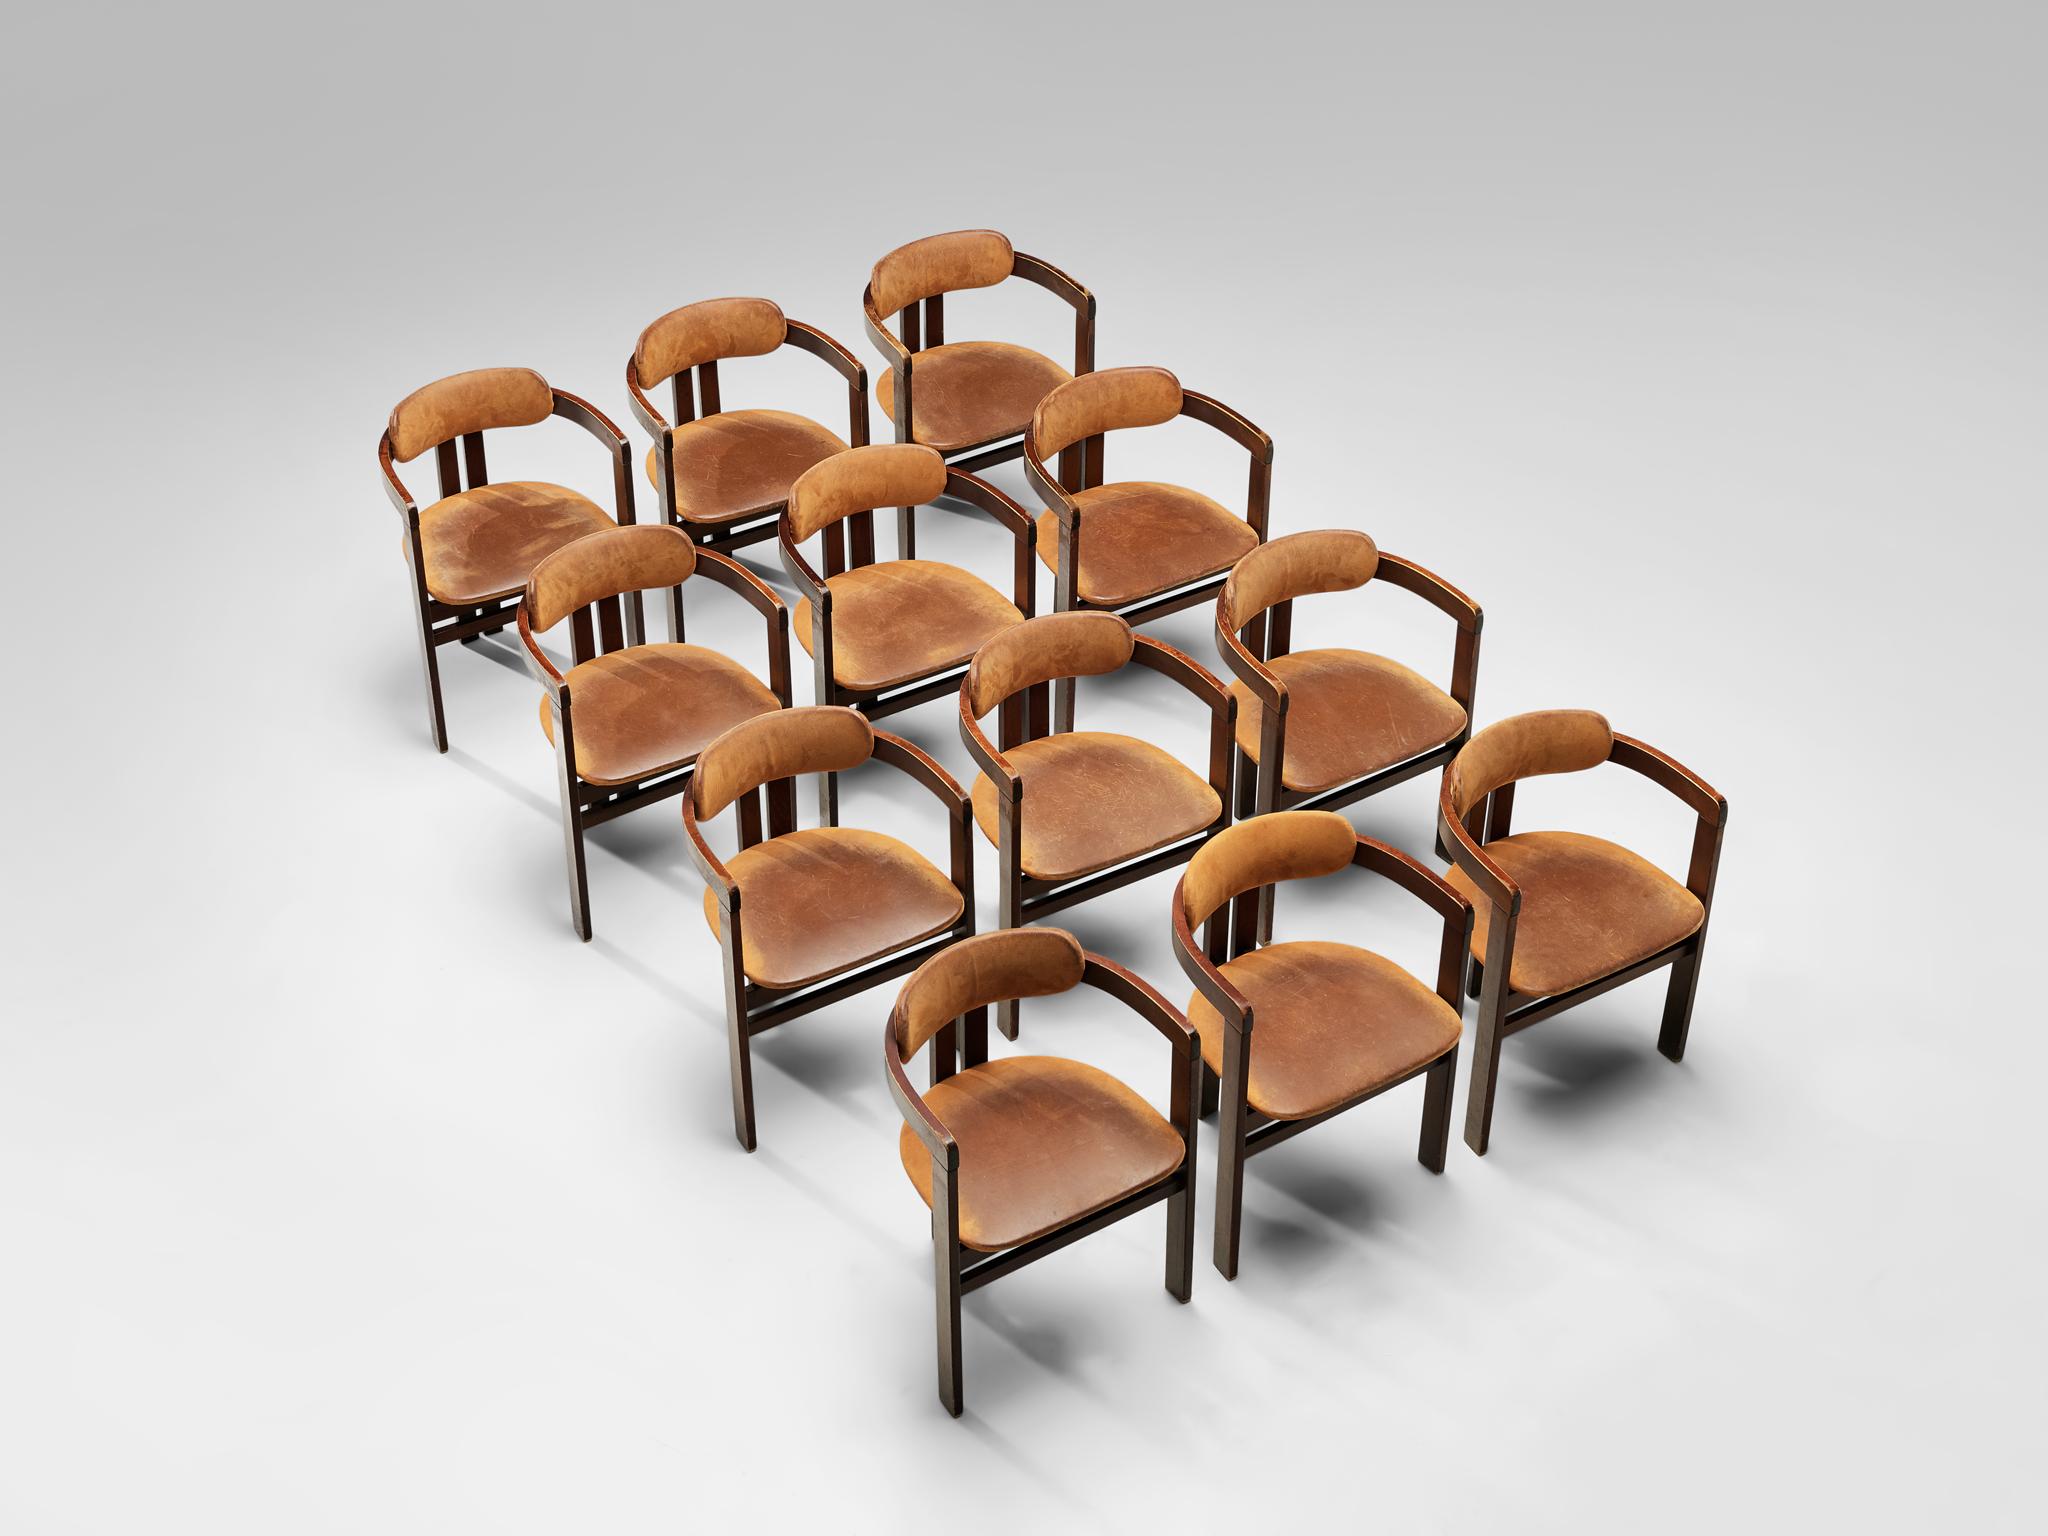 Armchairs, faux-leather and lacquered wood, Italy, 1960s

Armchairs in wood with cognac leatherette. The chairs have a characteristic design, clearly inspired by the Pamplona chair of Augusto Savini. The chairs are functional and straightforward of